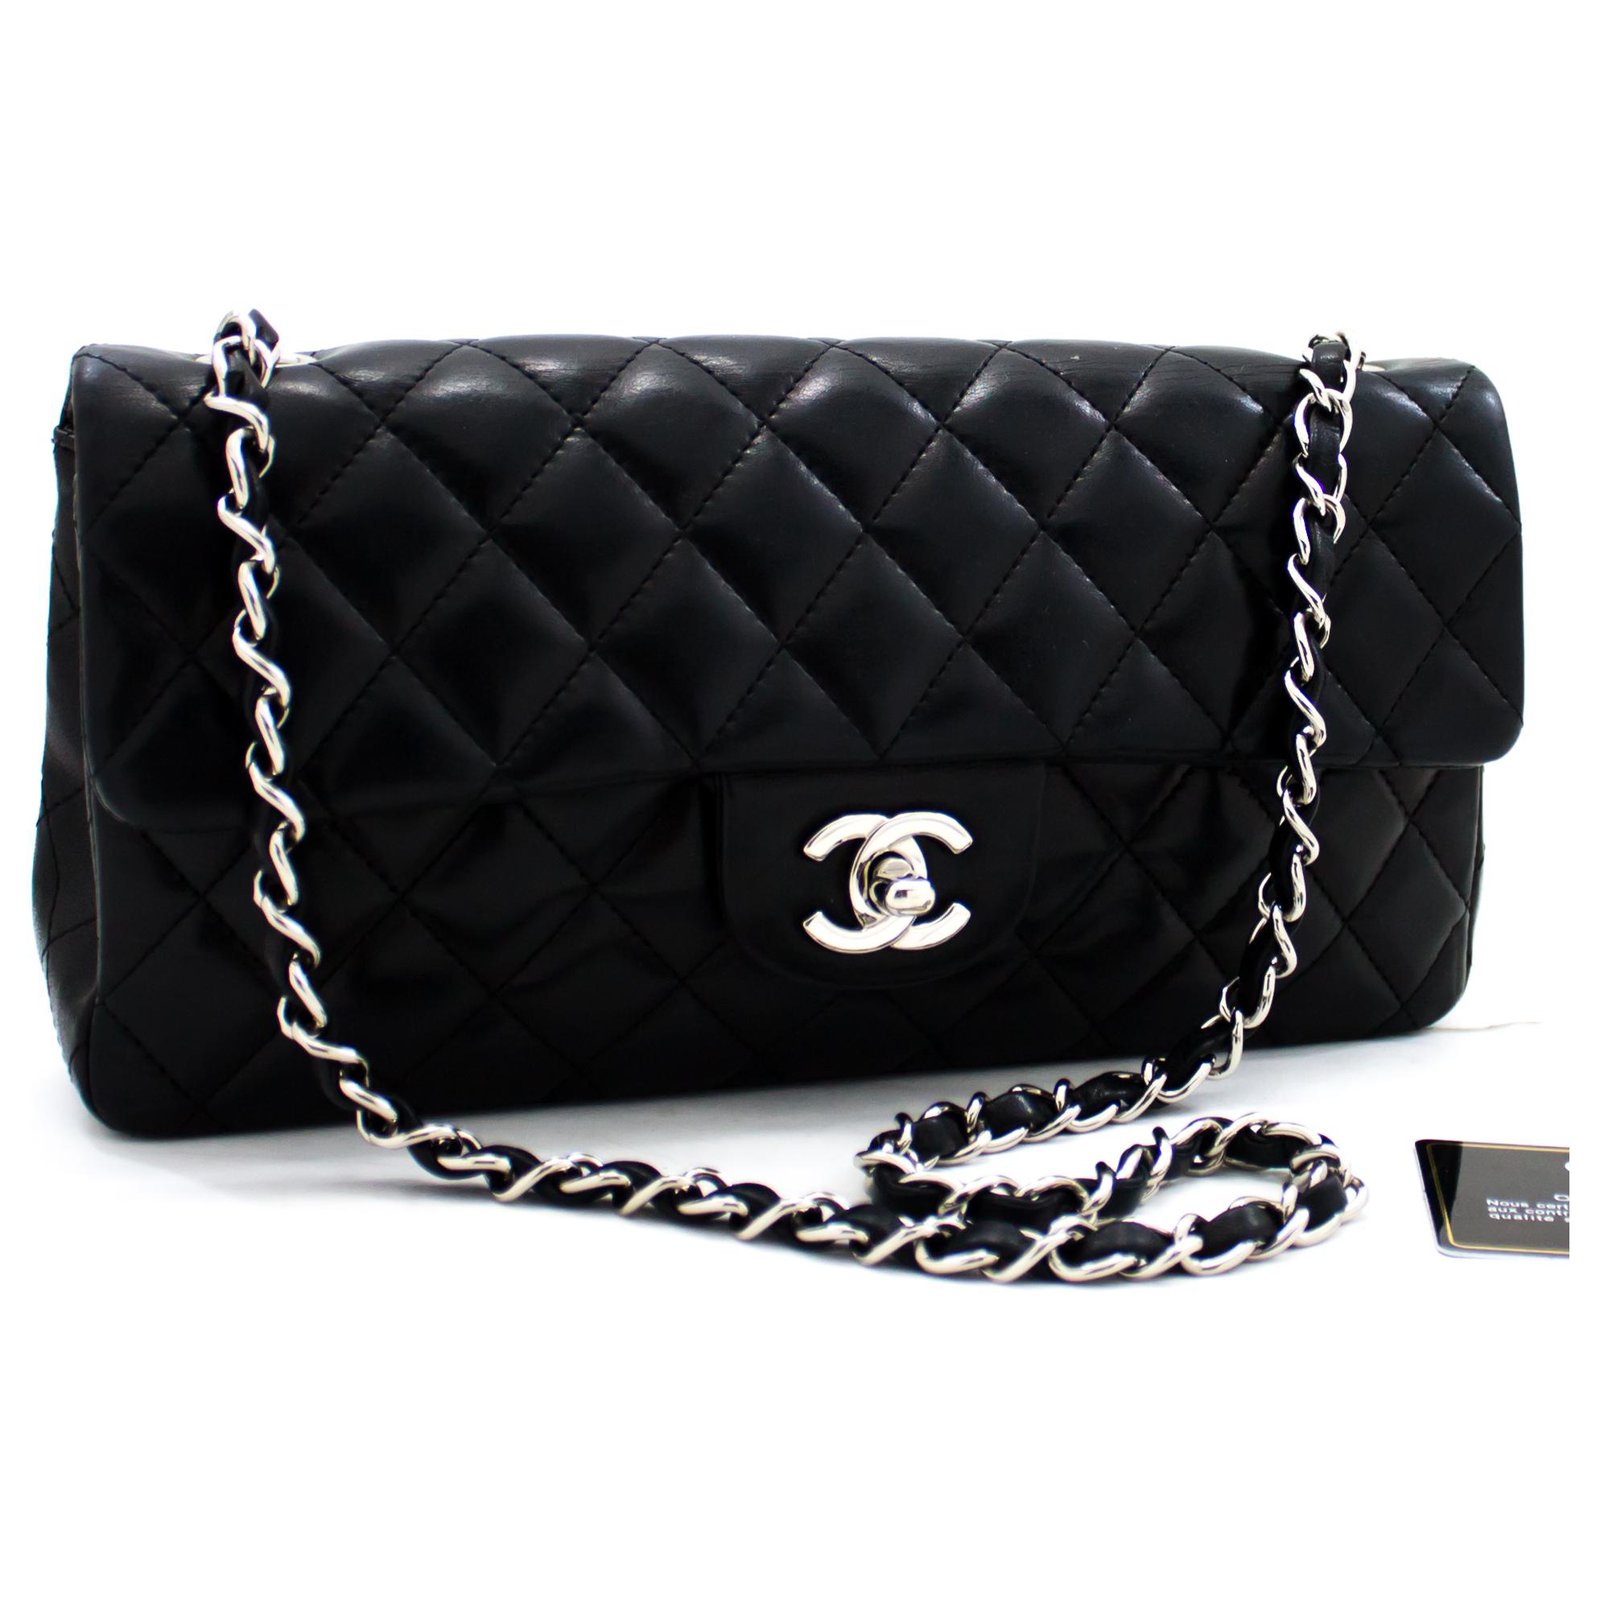 A BEIGE CAVIAR LEATHER CLASSIC MEDIUM DOUBLE FLAP BAG WITH SILVER HARDWARE  CHANEL 2006  Christies